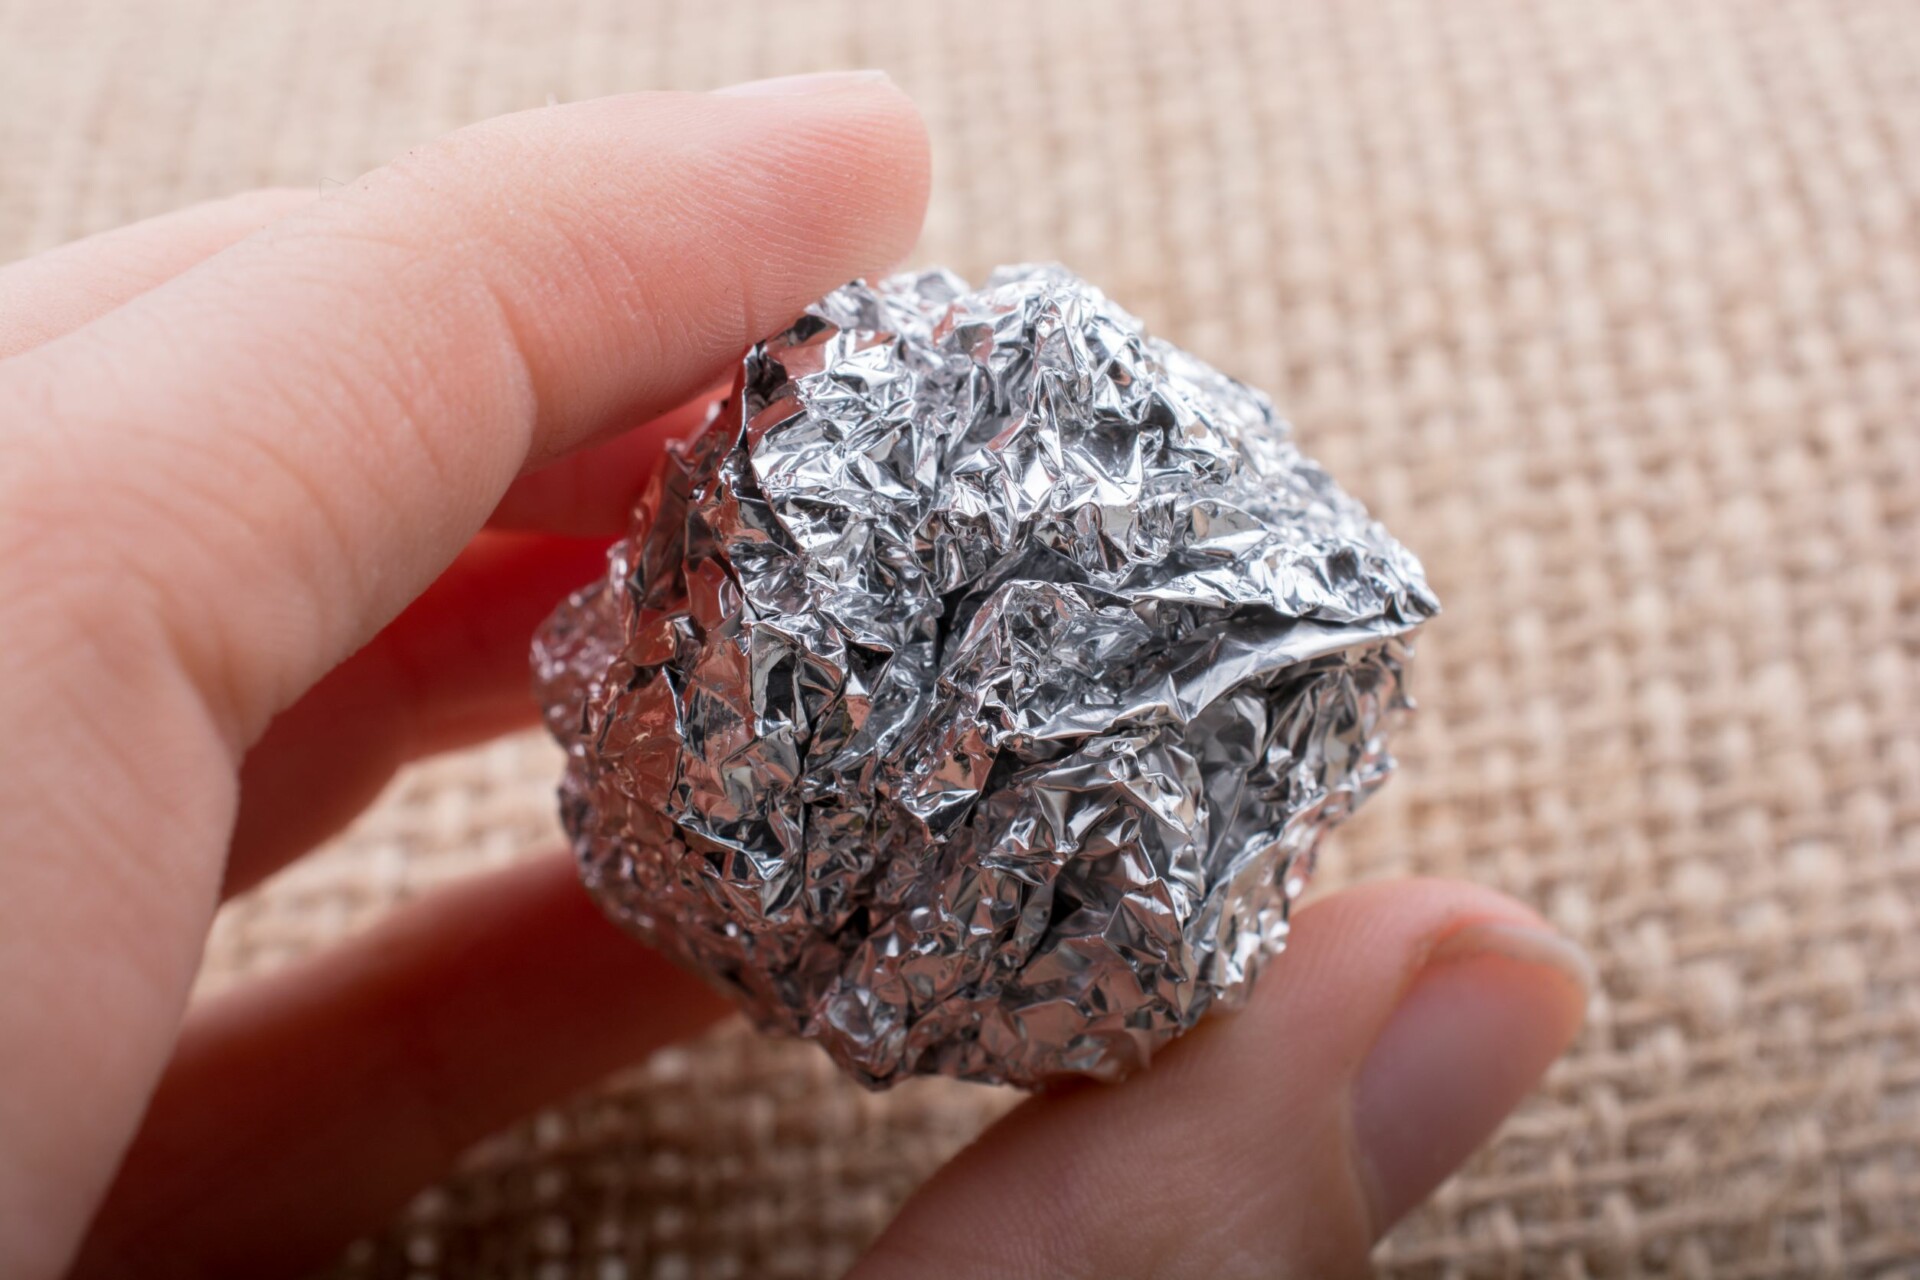 http://citizensustainable.com/wp-content/uploads/2023/01/Is-Aluminum-Foil-Bad-for-the-Environment.jpg